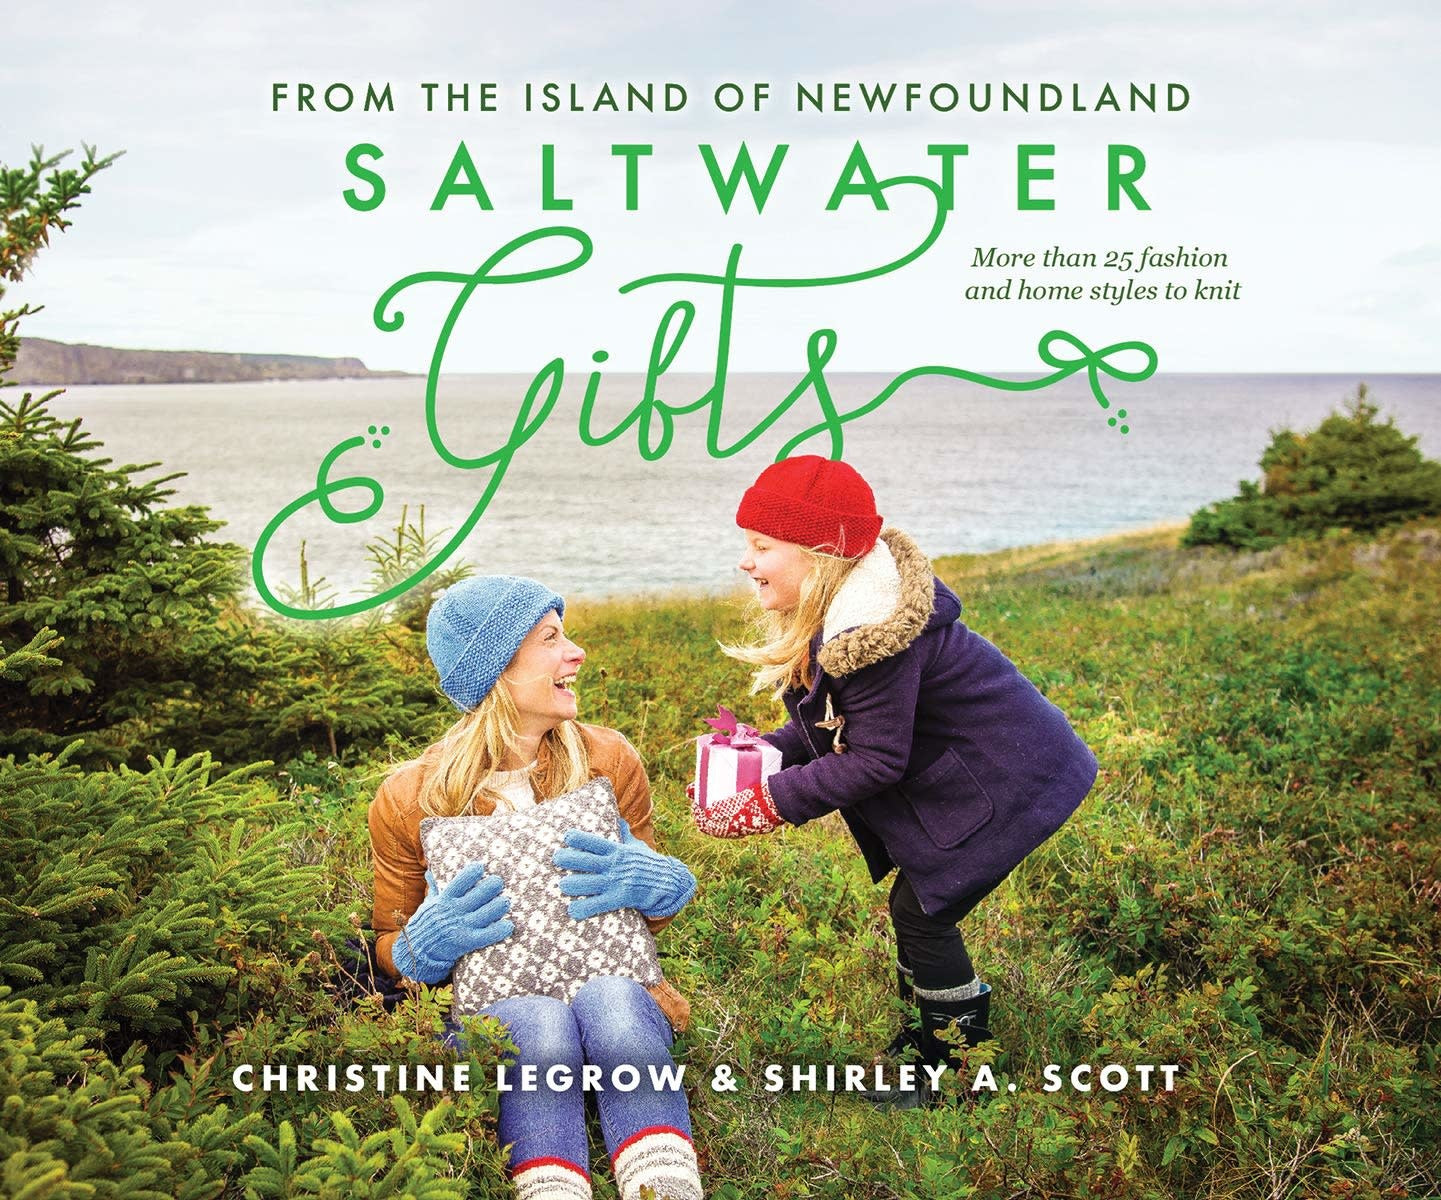 Saltwater Gifts from the Island of Newfoundland: More Than 25 Fashion and Home Styles to Knit Paperback